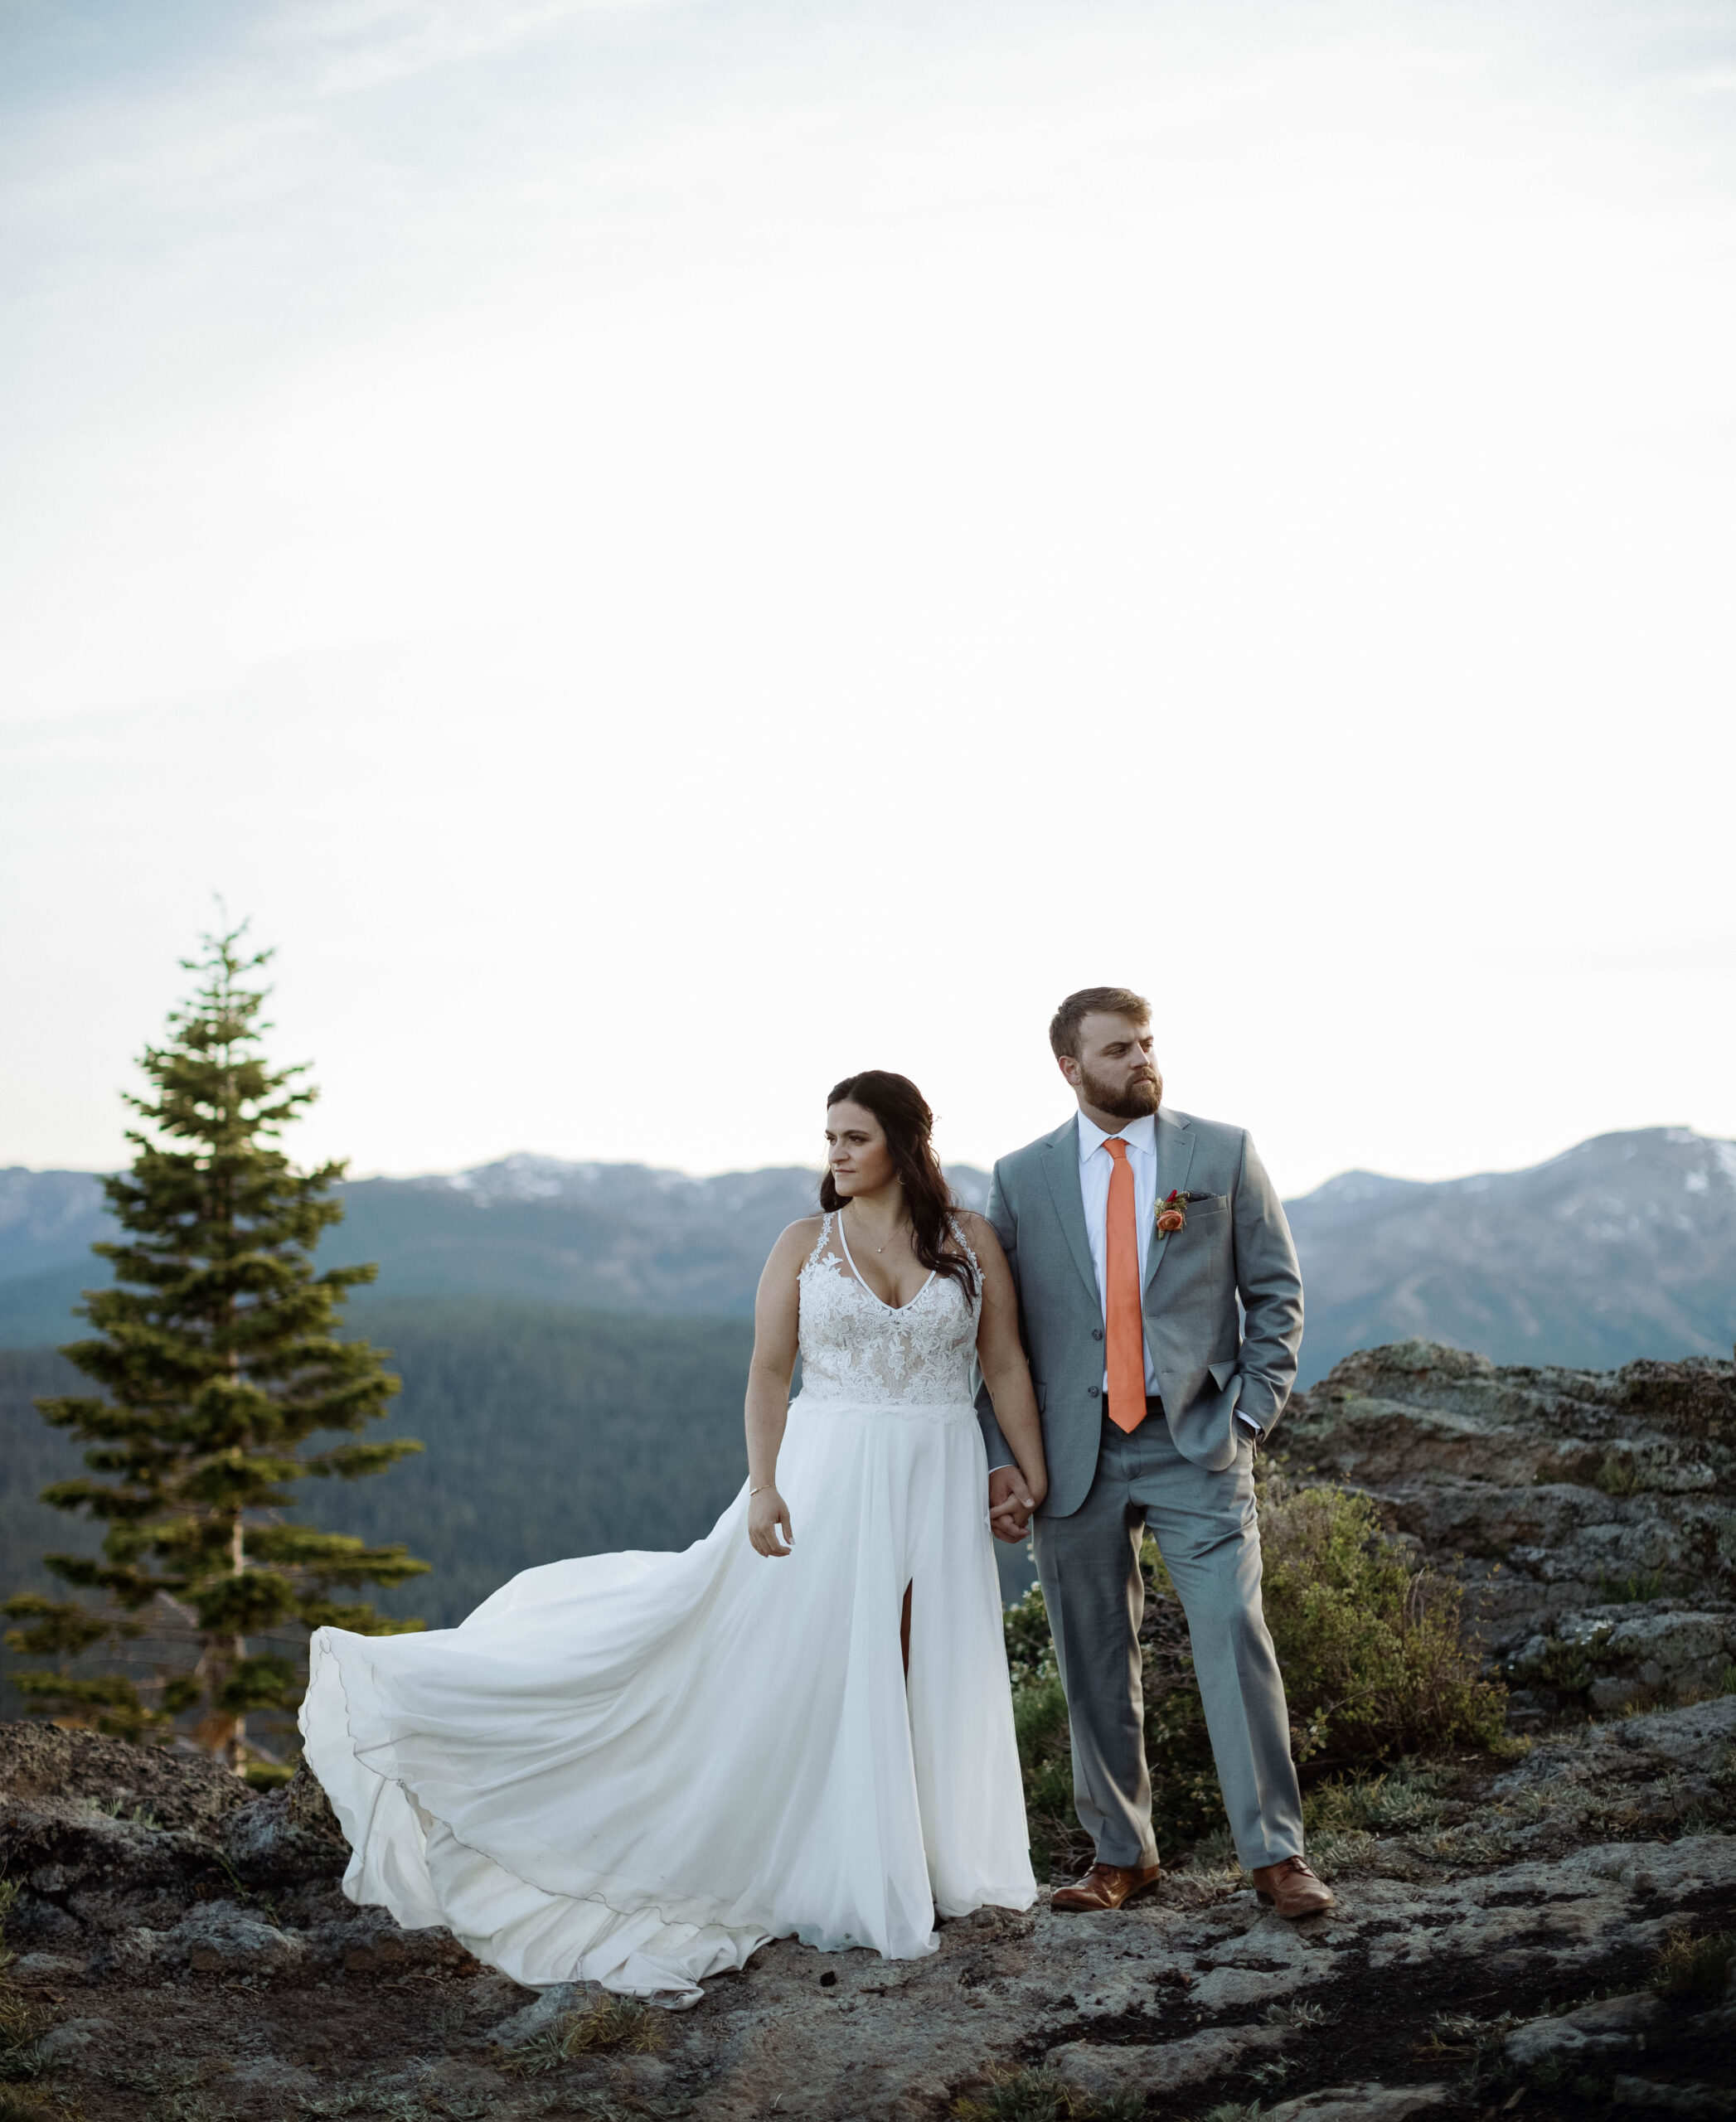 Intimate Elopement in The WOods of Lake TAhoe